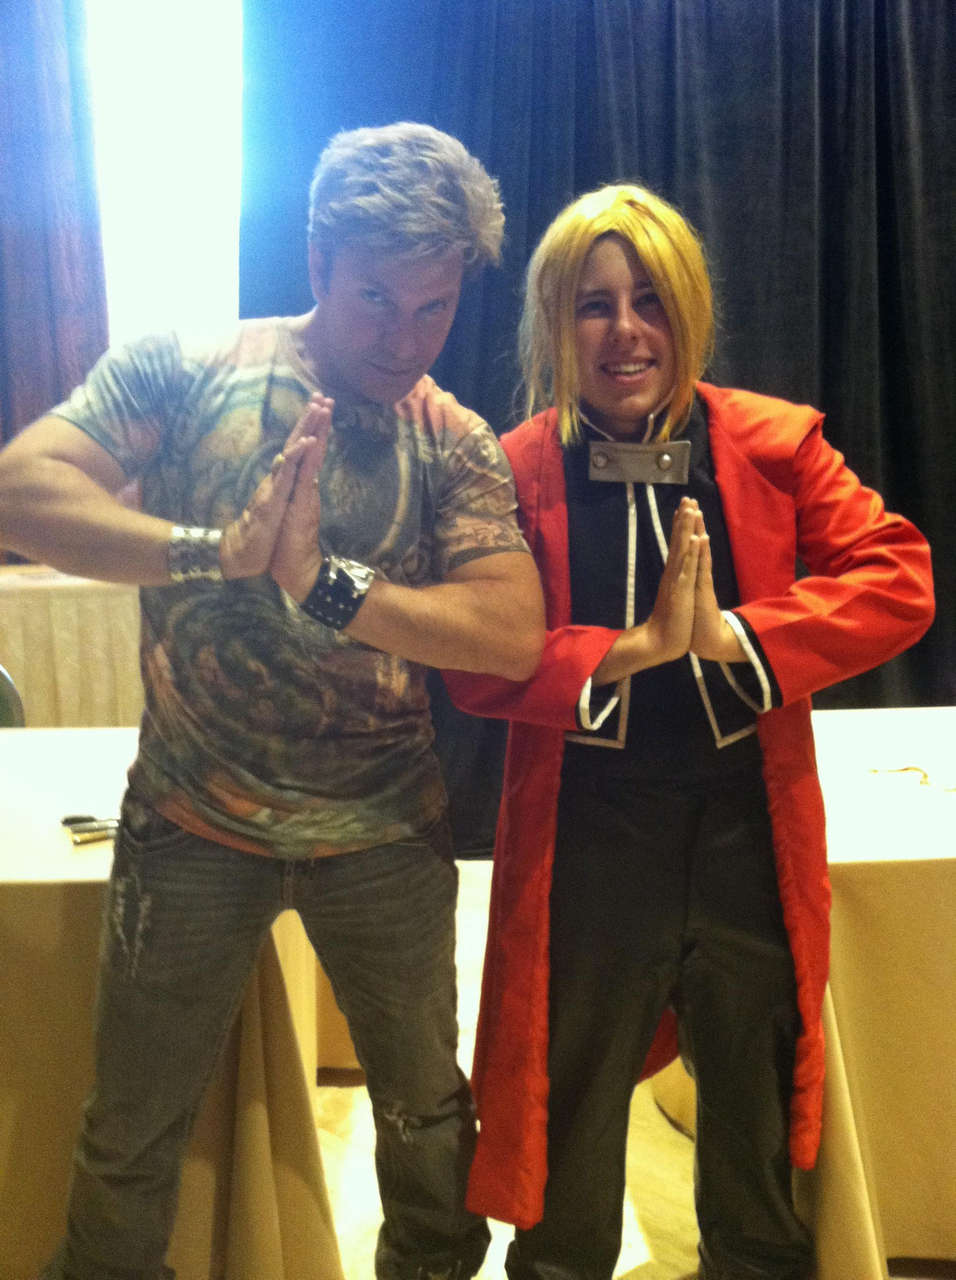 A Picture Of Me Cosplaying Edward Elric And Posing With Vic Mignogna At Oni Con 201